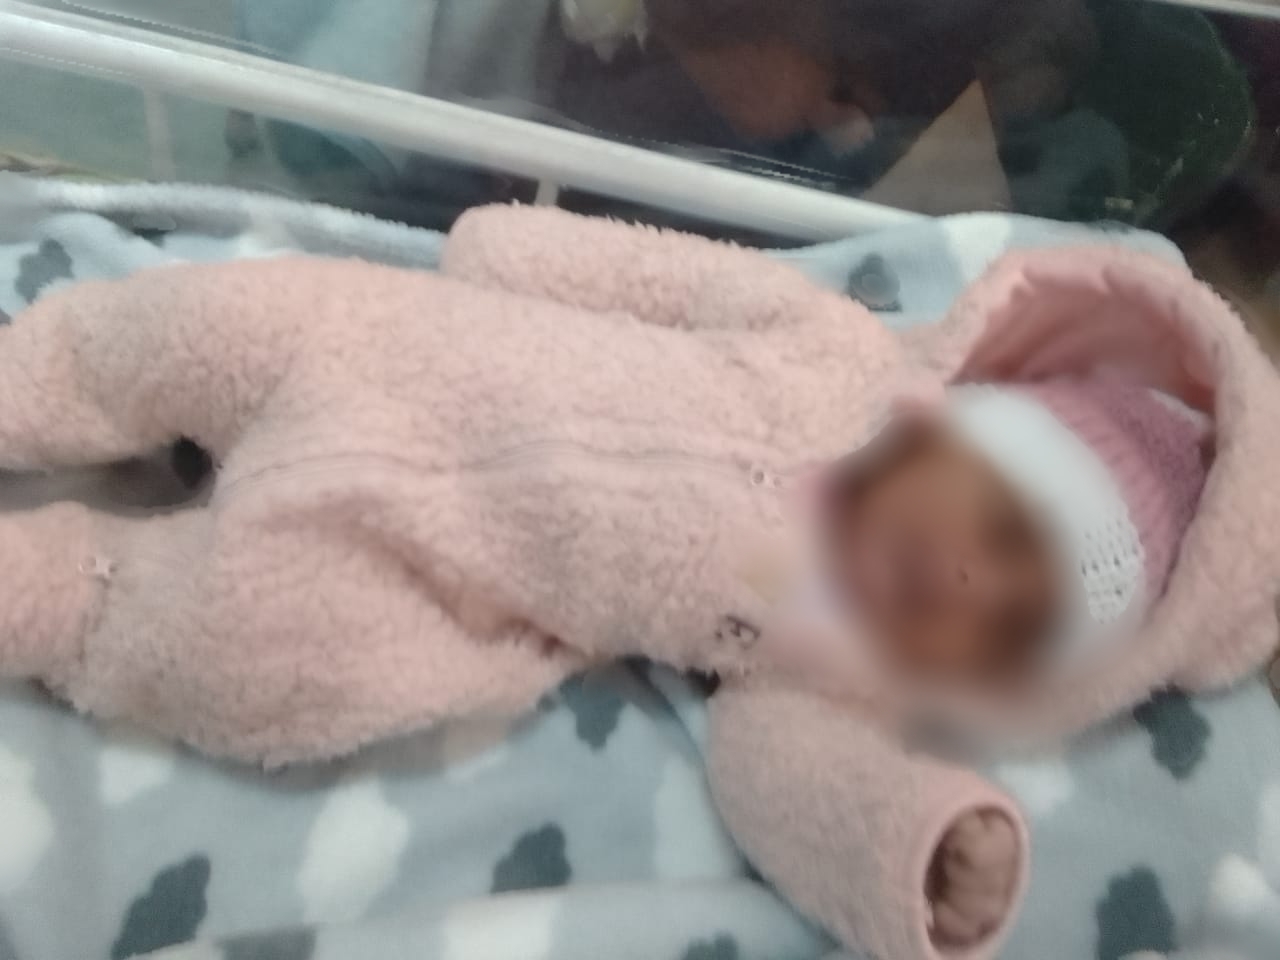 Woman fasted after newborn baby disappears from Kby hospital